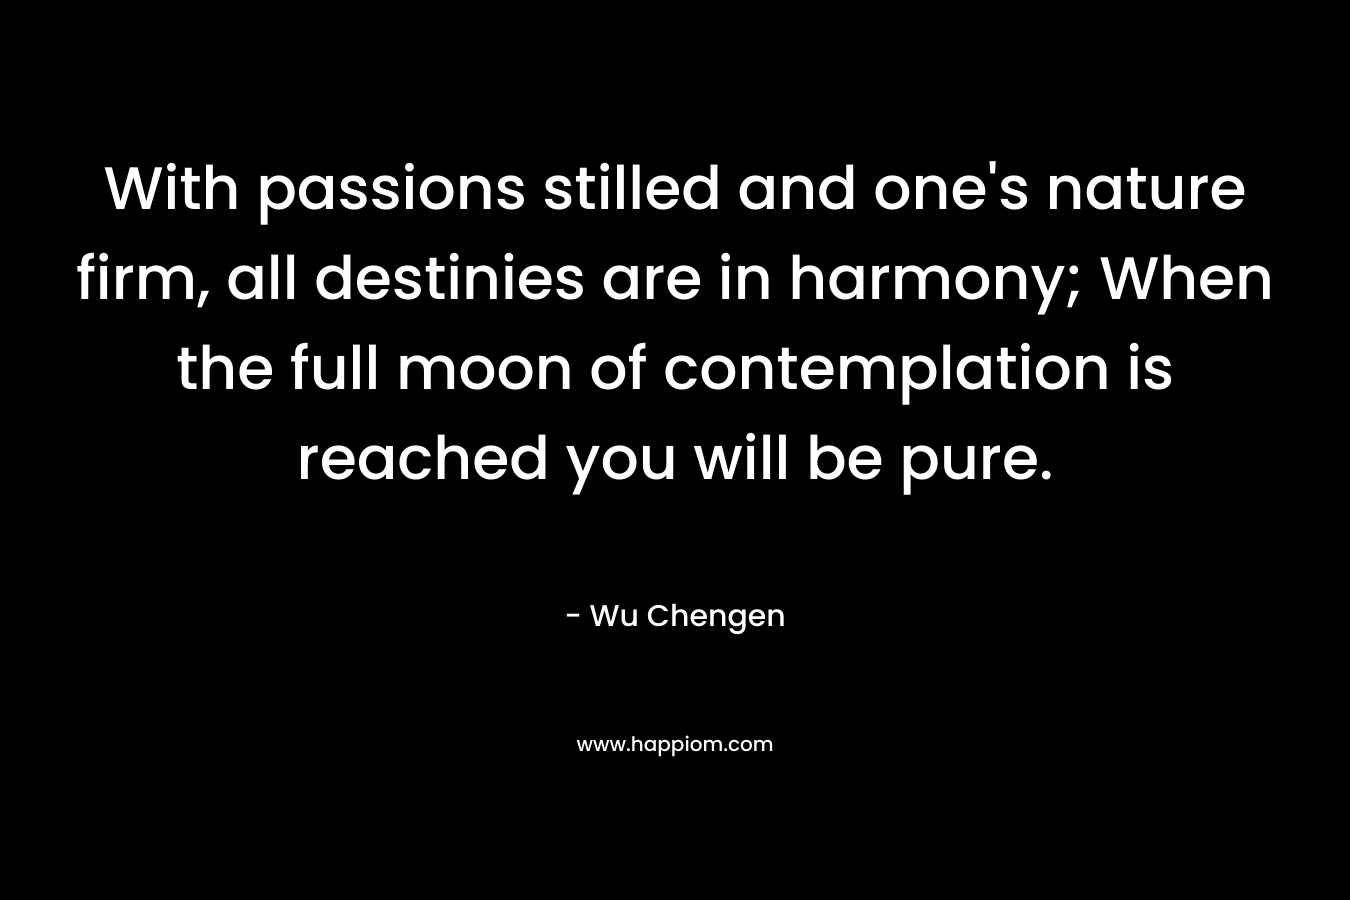 With passions stilled and one’s nature firm, all destinies are in harmony; When the full moon of contemplation is reached you will be pure. – Wu Chengen